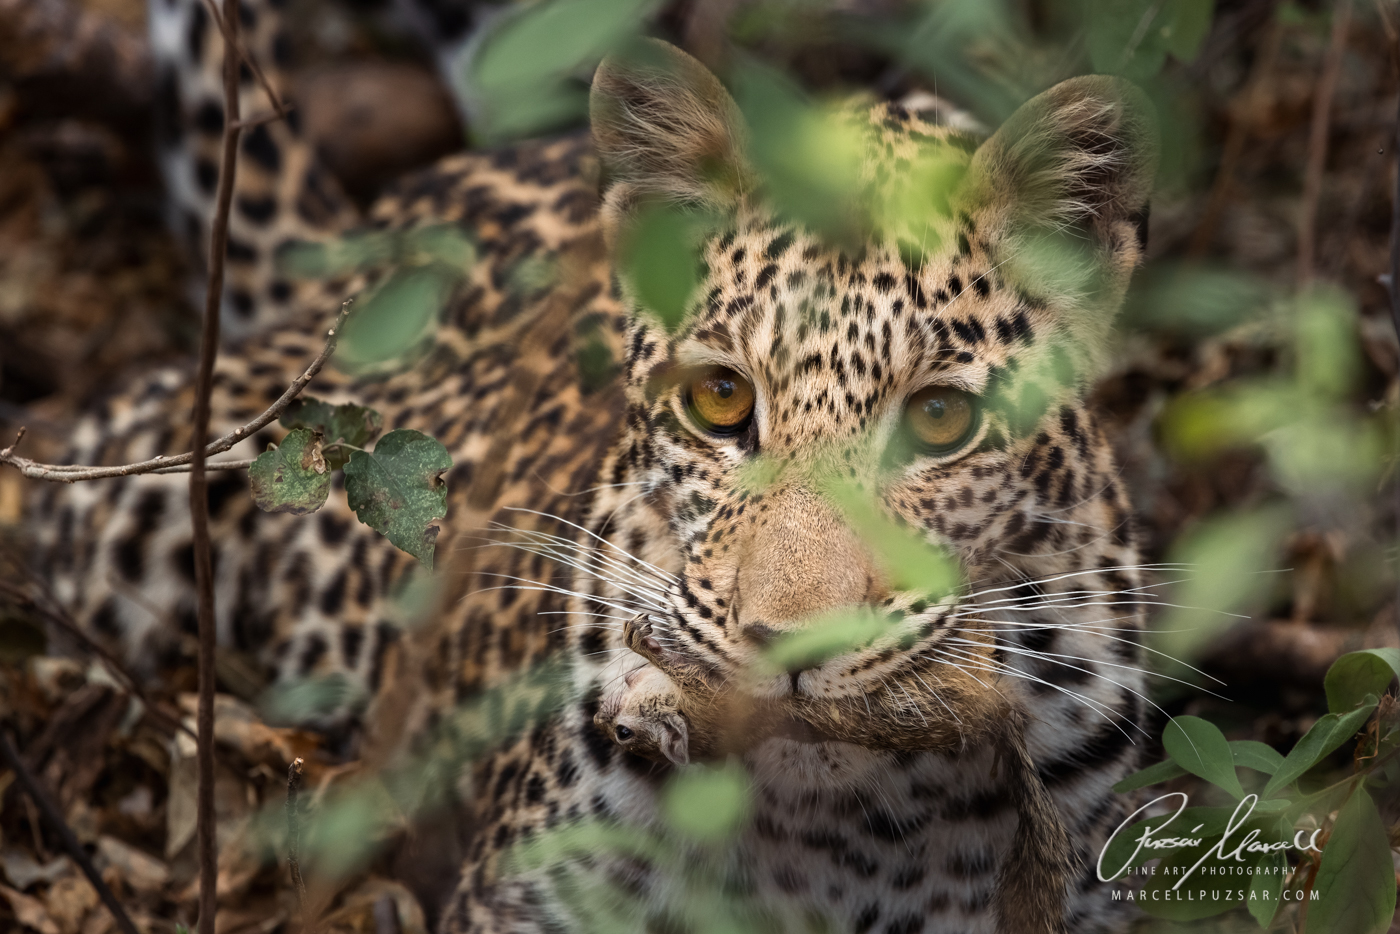 A young leopard ﻿is polishing his hunting skills and had a successful hunt on the ground with a ﻿Smiths's Bush Squirrel in its mouth.

Fine Art Limited Editio